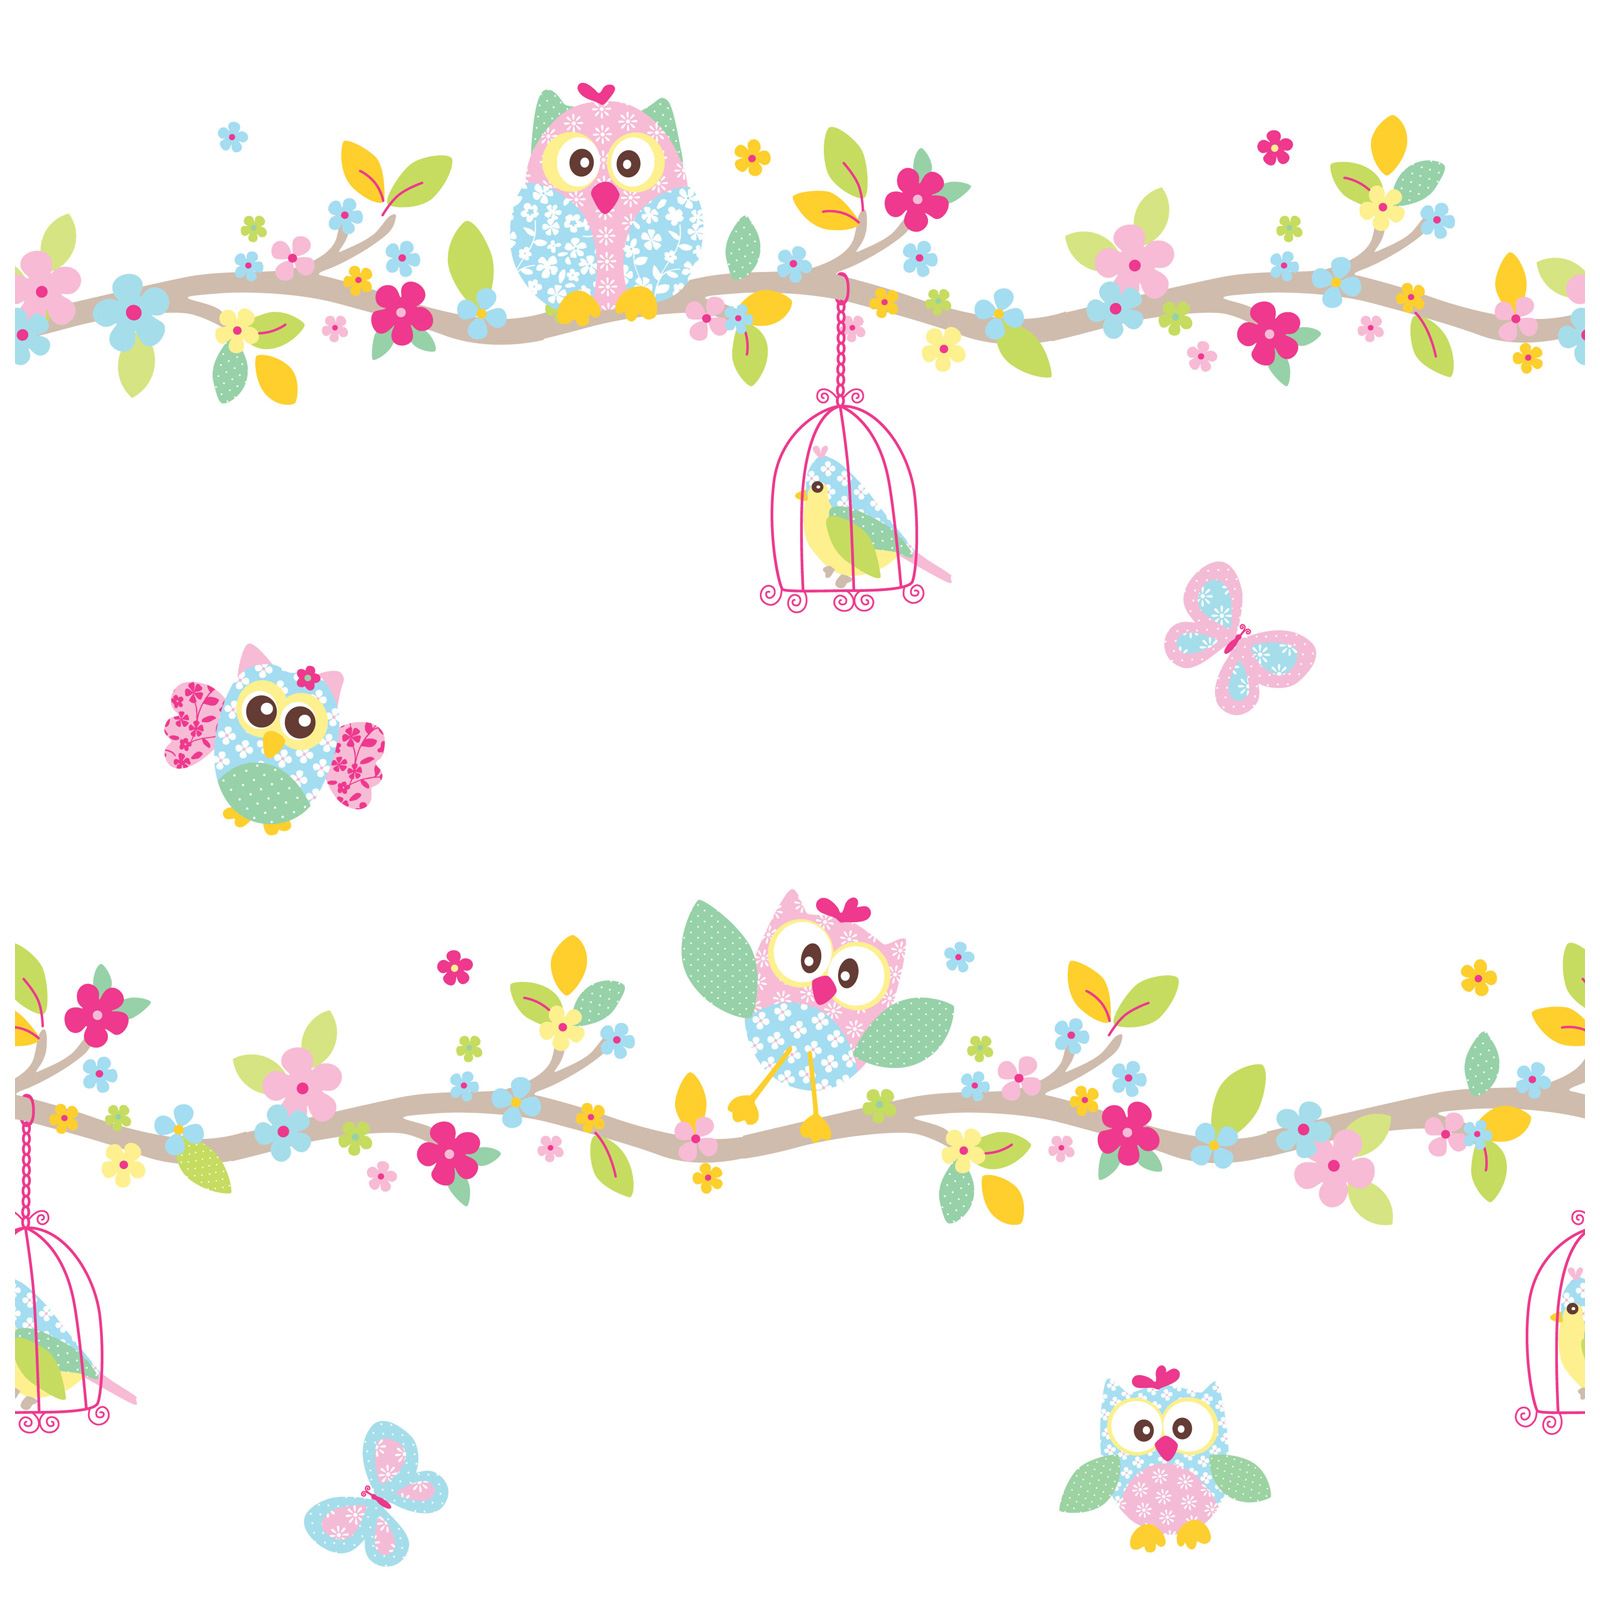 Free Download Patchwork Owl Wallpaper And Border White Pink